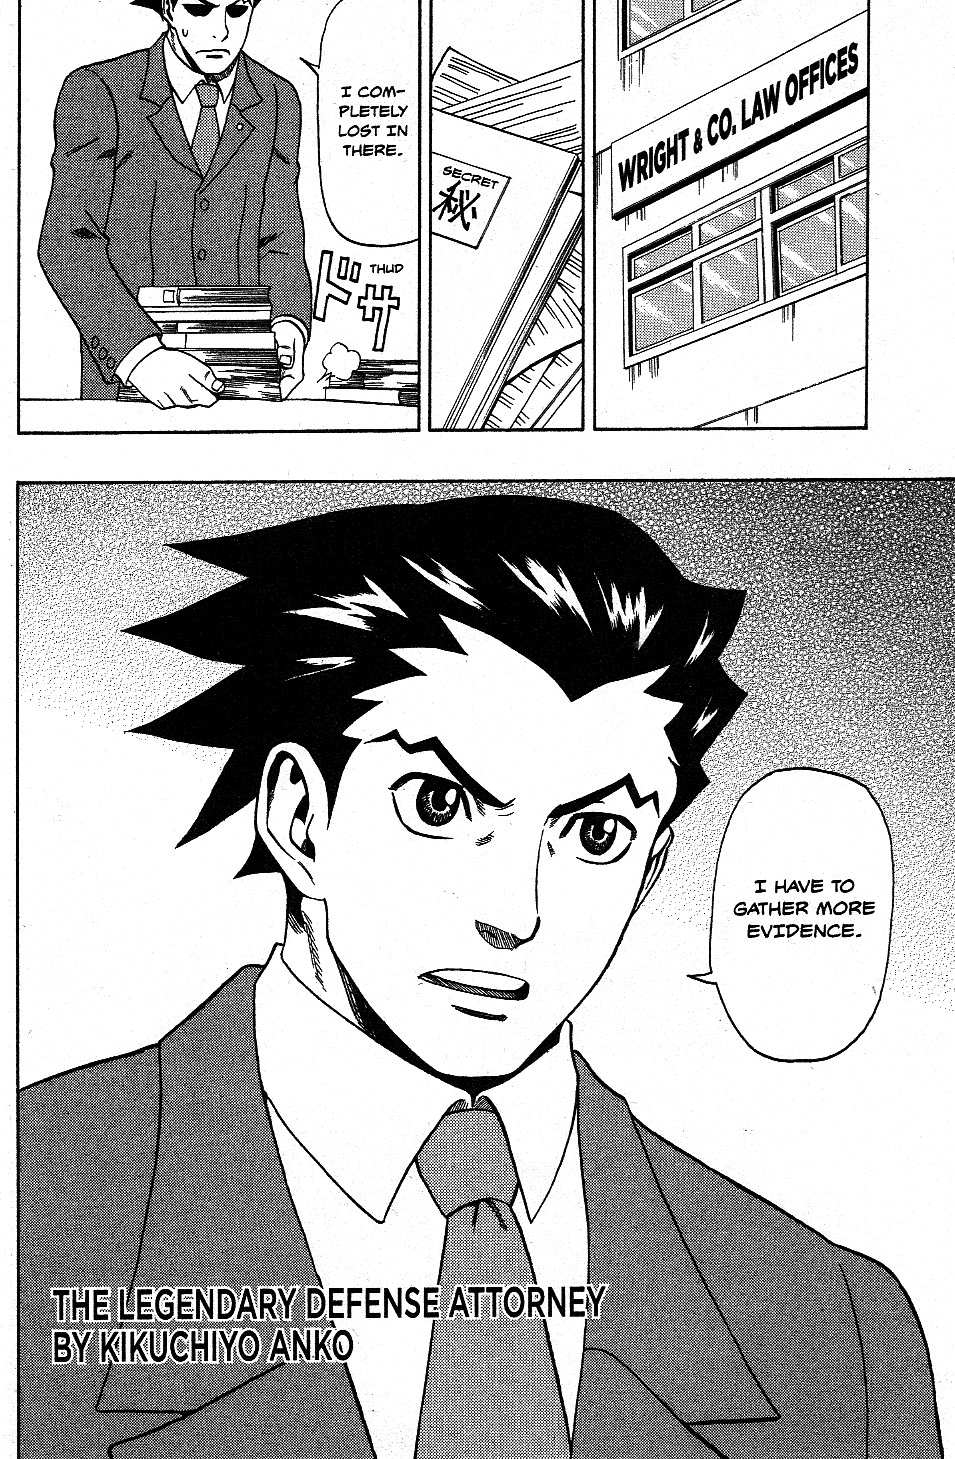 Phoenix Wright: Ace Attorney - Official Casebook Vol.1 Chapter 16: The Legendary Defense Attorney - By Kikuchiyo Anko - Picture 1